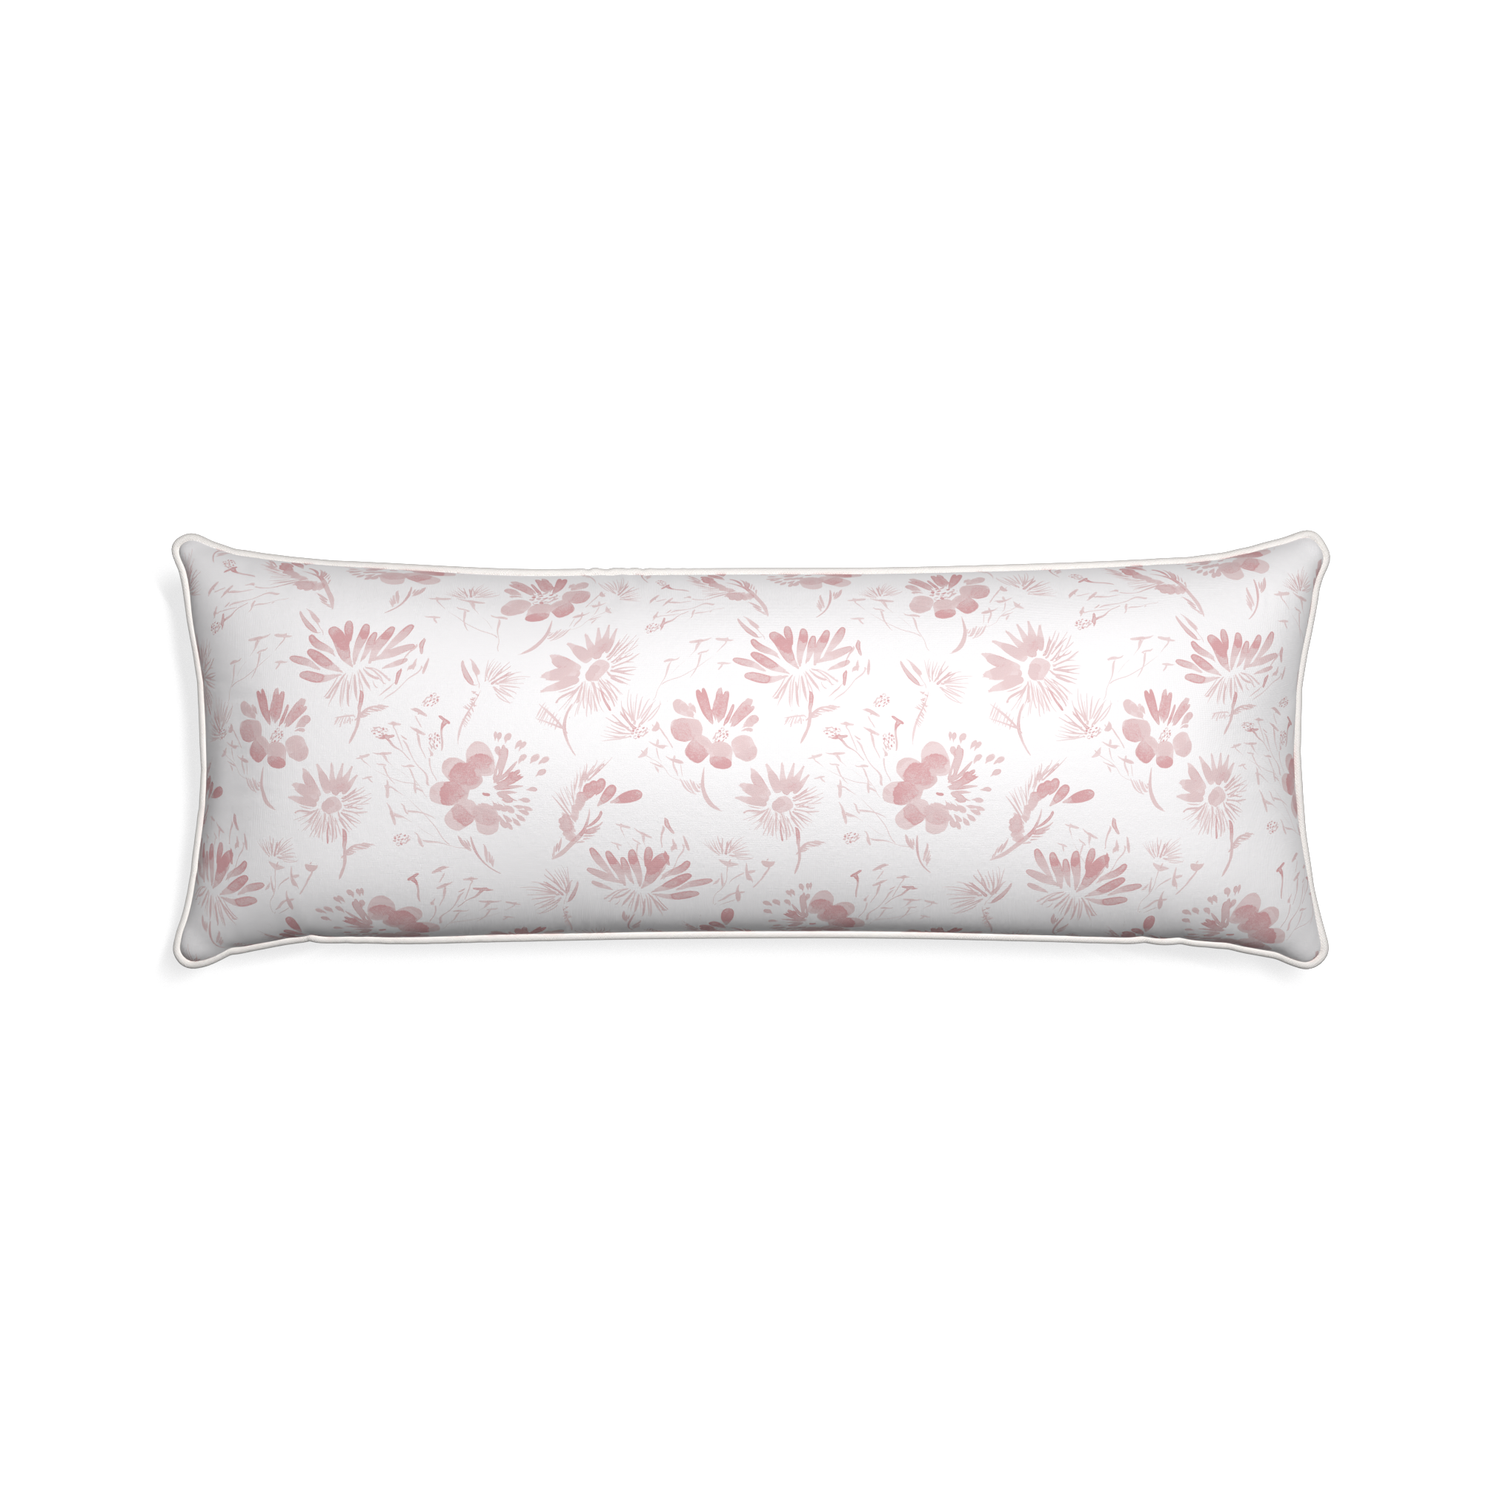 Xl-lumbar blake custom pink floralpillow with snow piping on white background